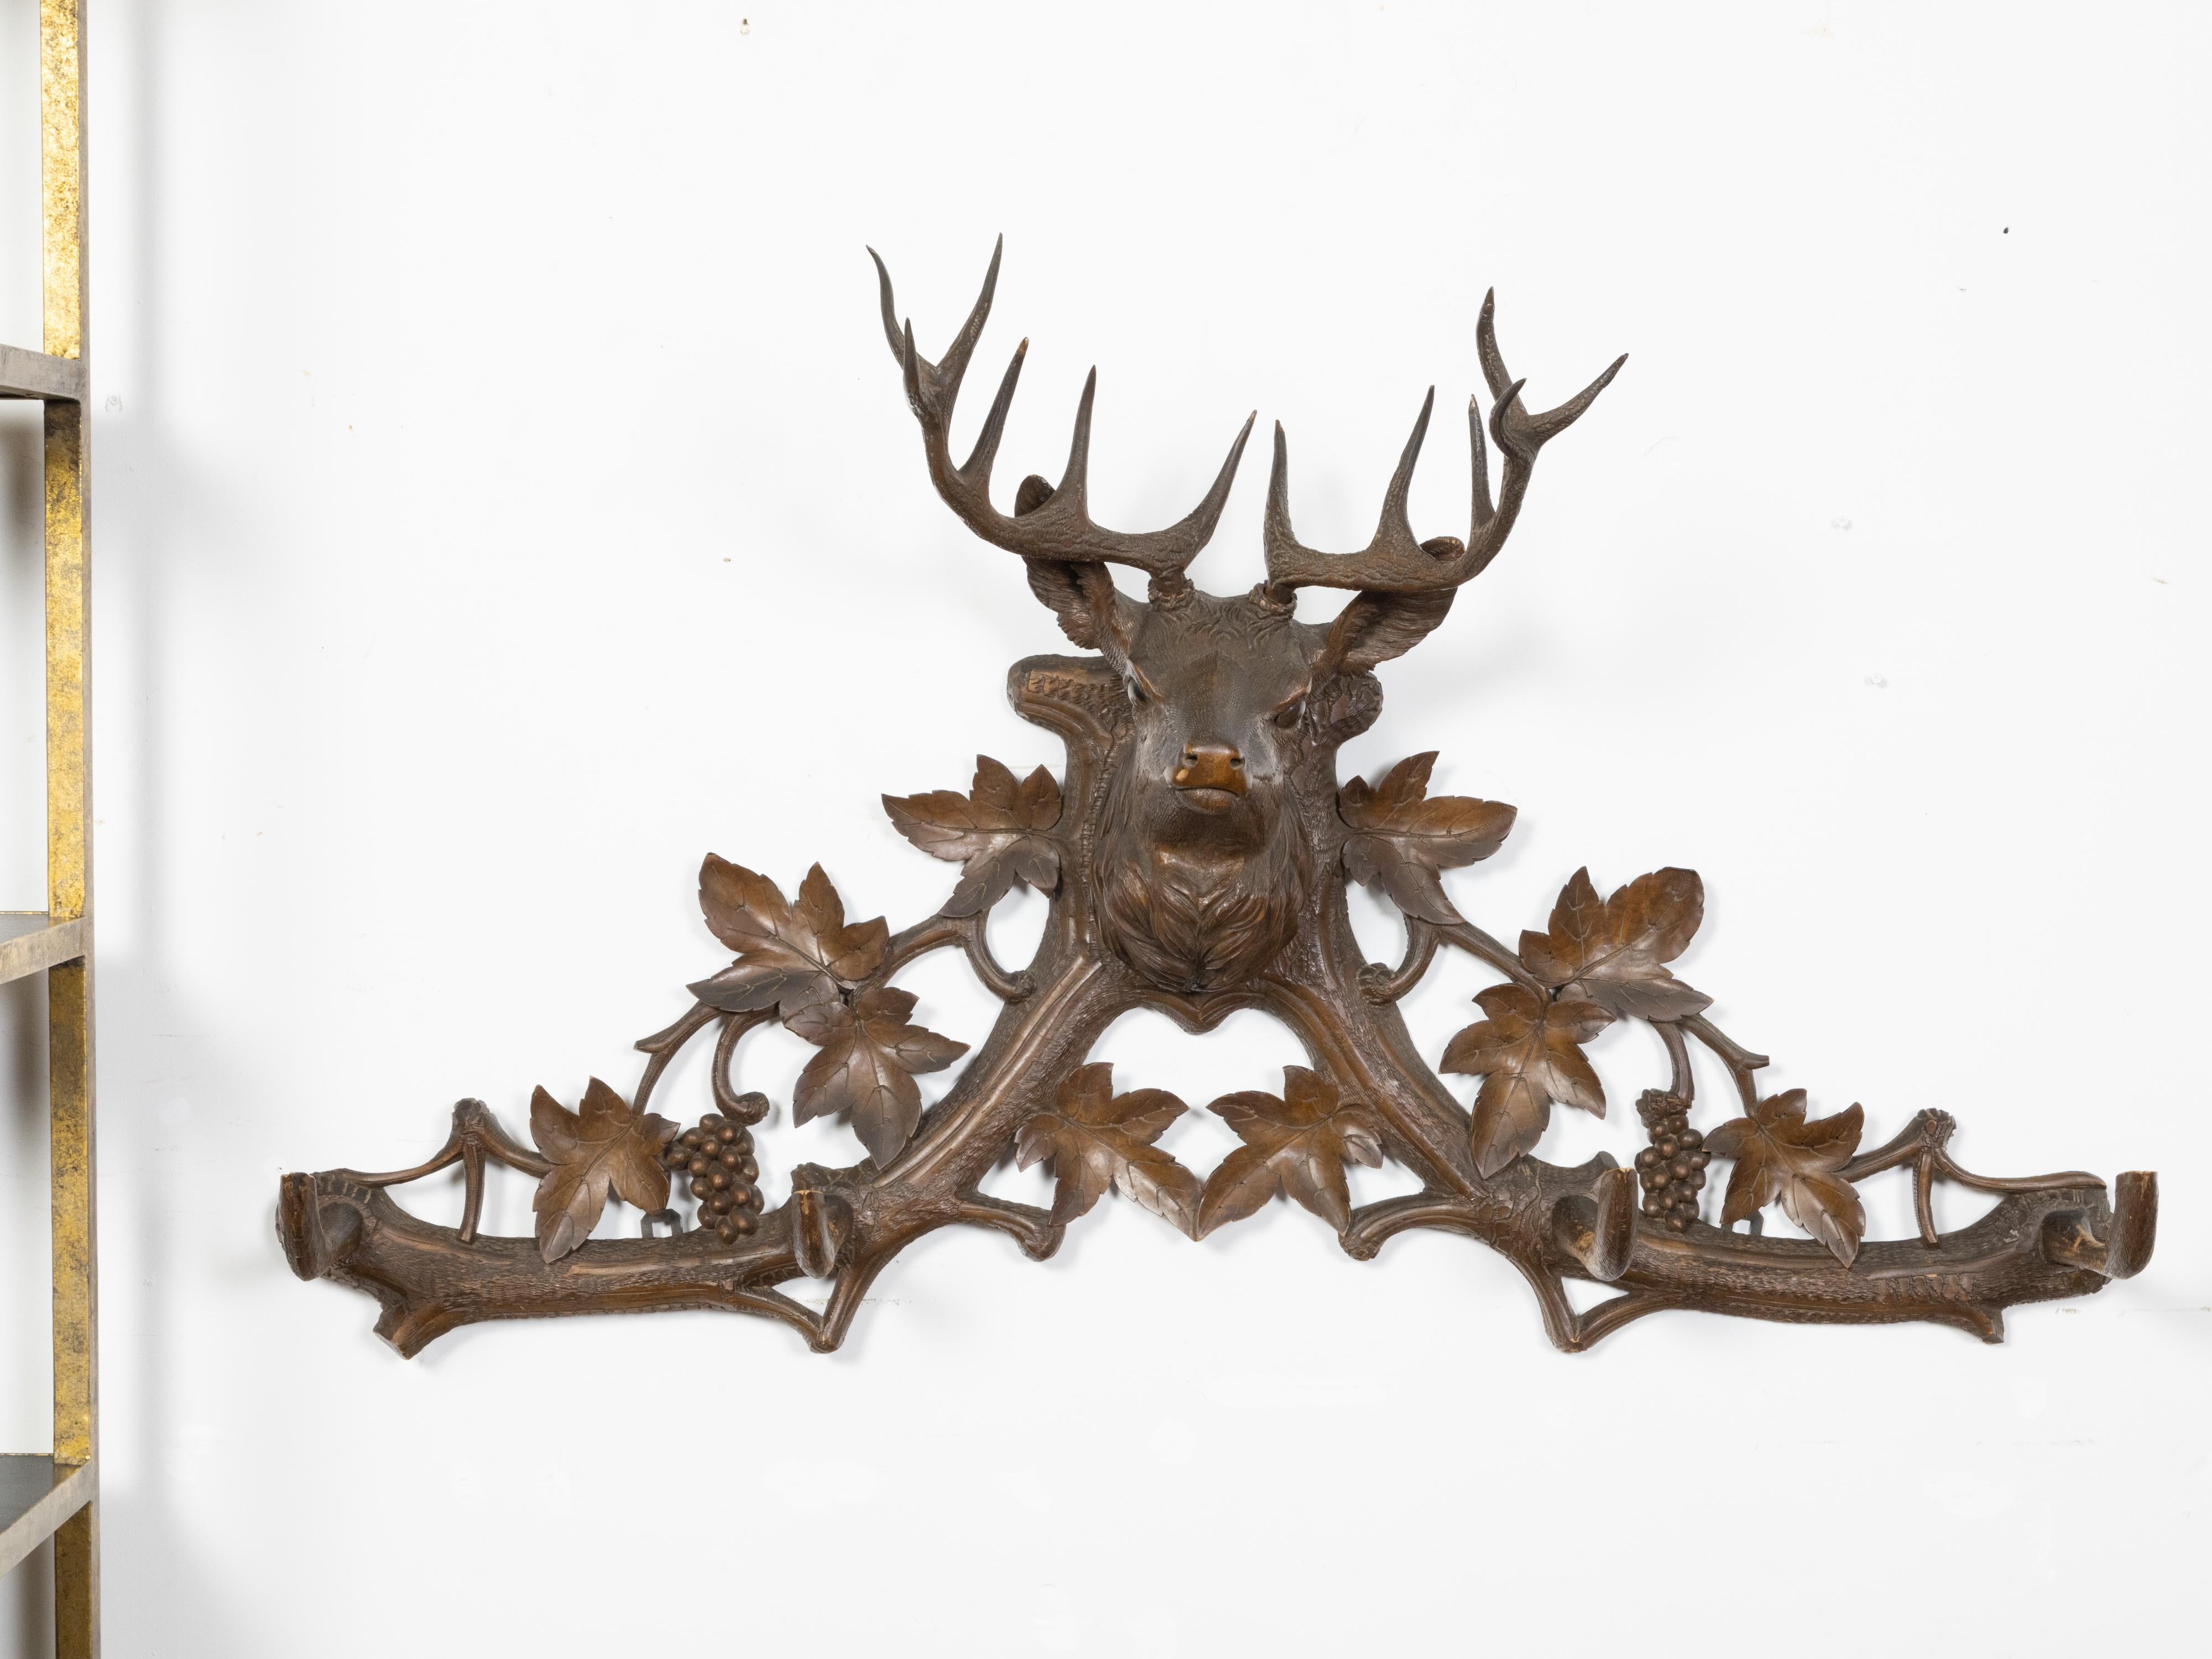 A Swiss Black Forest coat hanger from the early 20th century depicting a hand-carved stag head and grapevines. Created in Switzerland during the Turn of the Century (19th to 20th), this Black Forest coat hanger attracts our attention with its